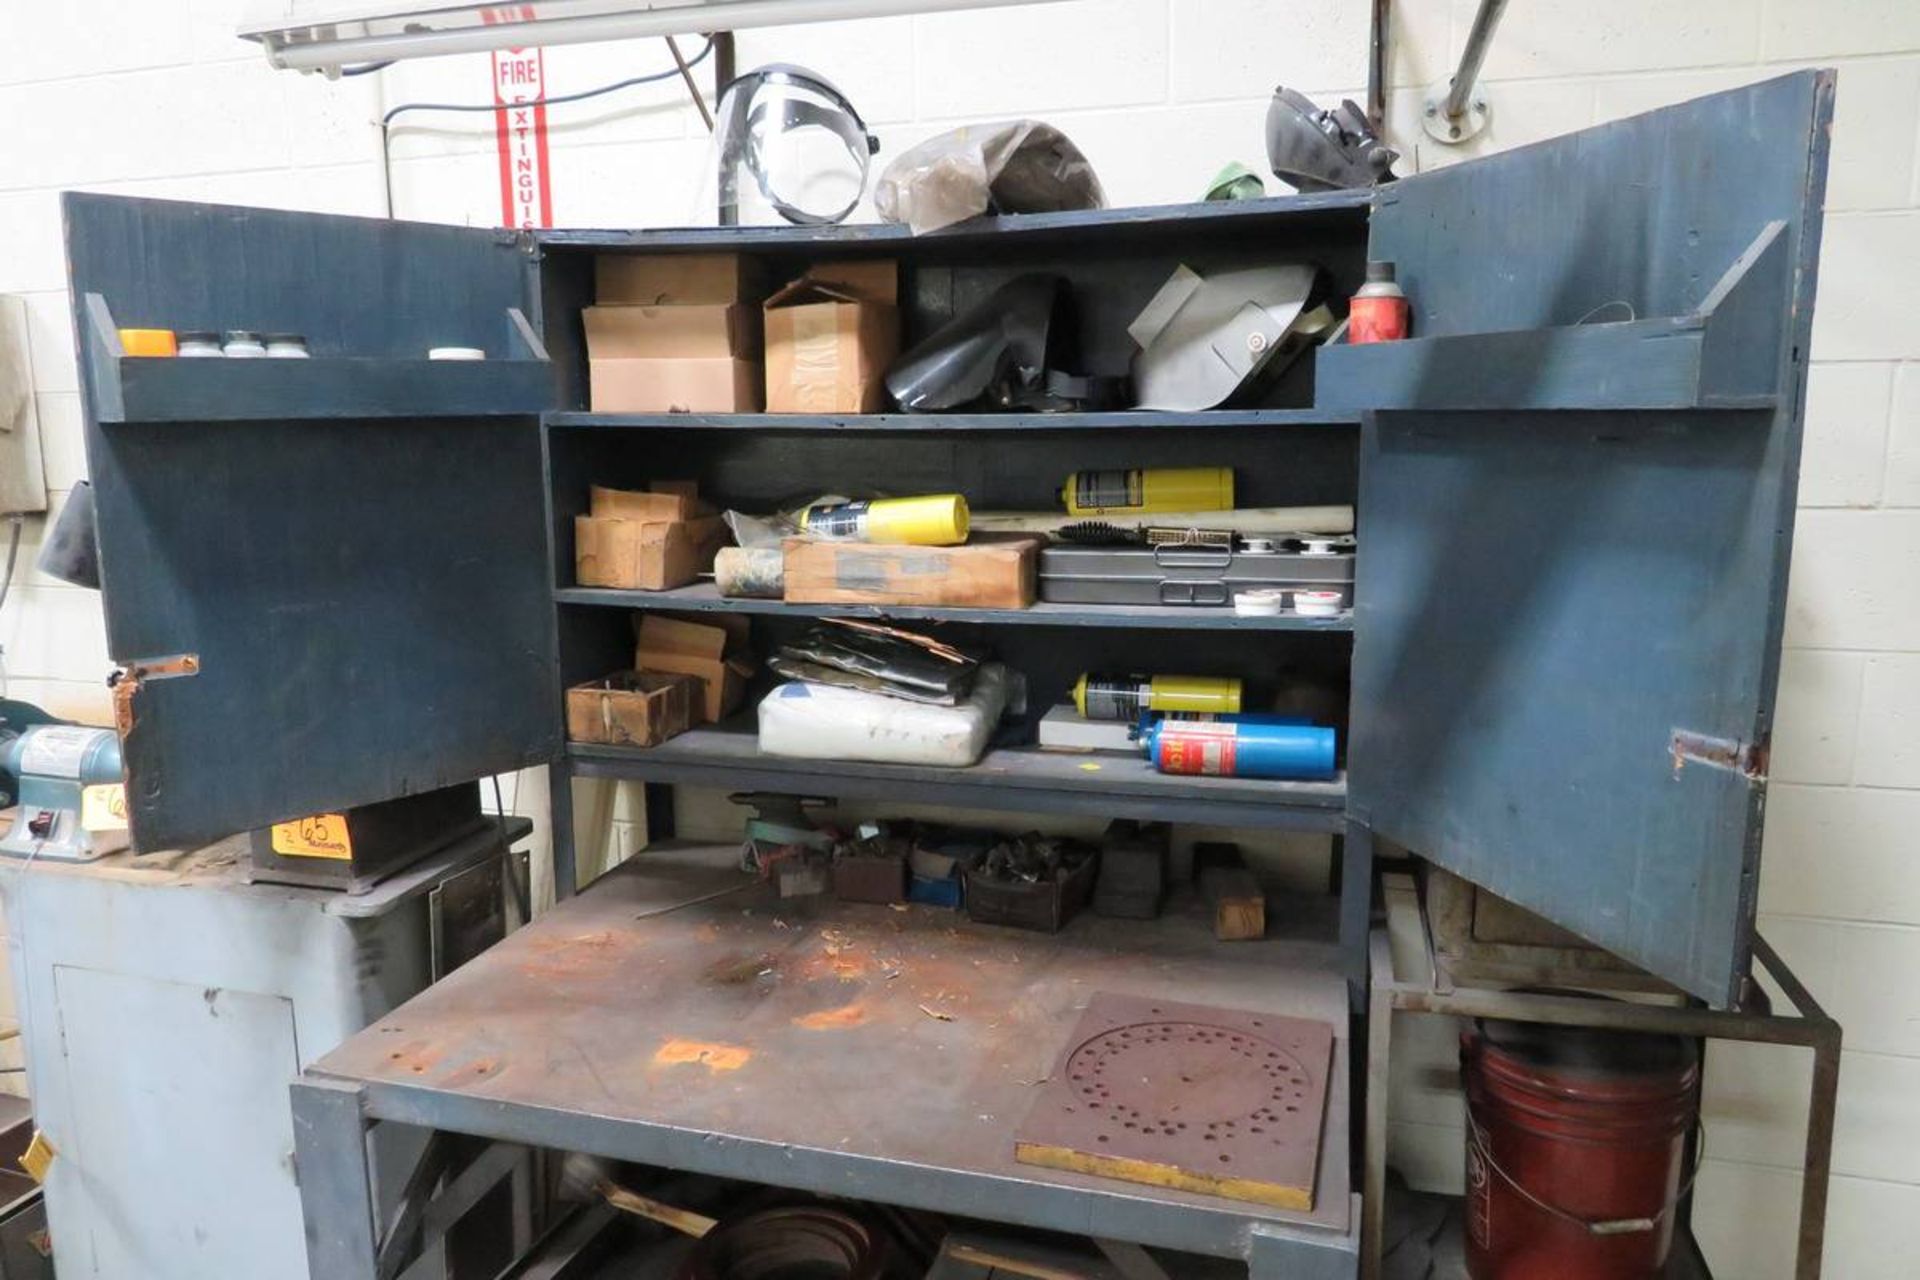 Carbon Steel Work Bench - Image 3 of 3